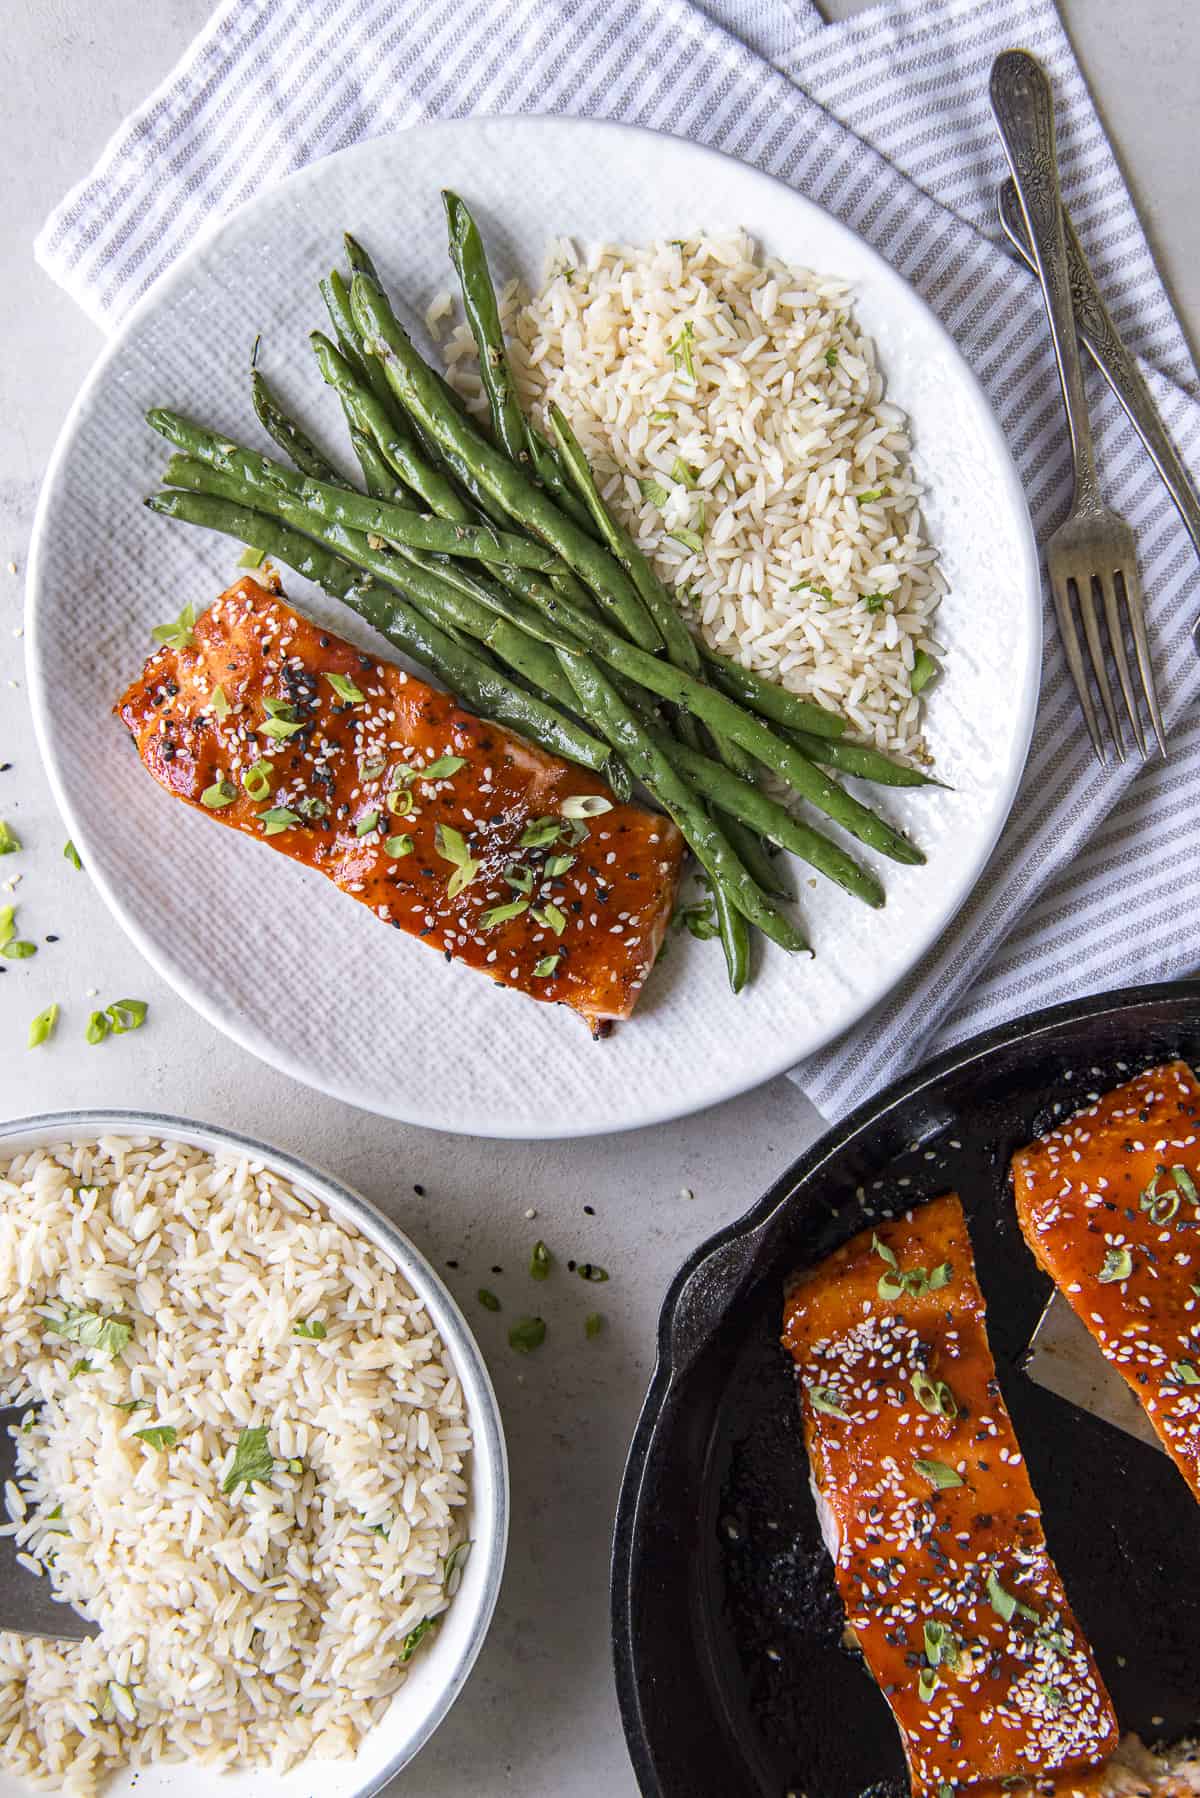 A skillet with salmon, asparagus, rice and sesame seeds.